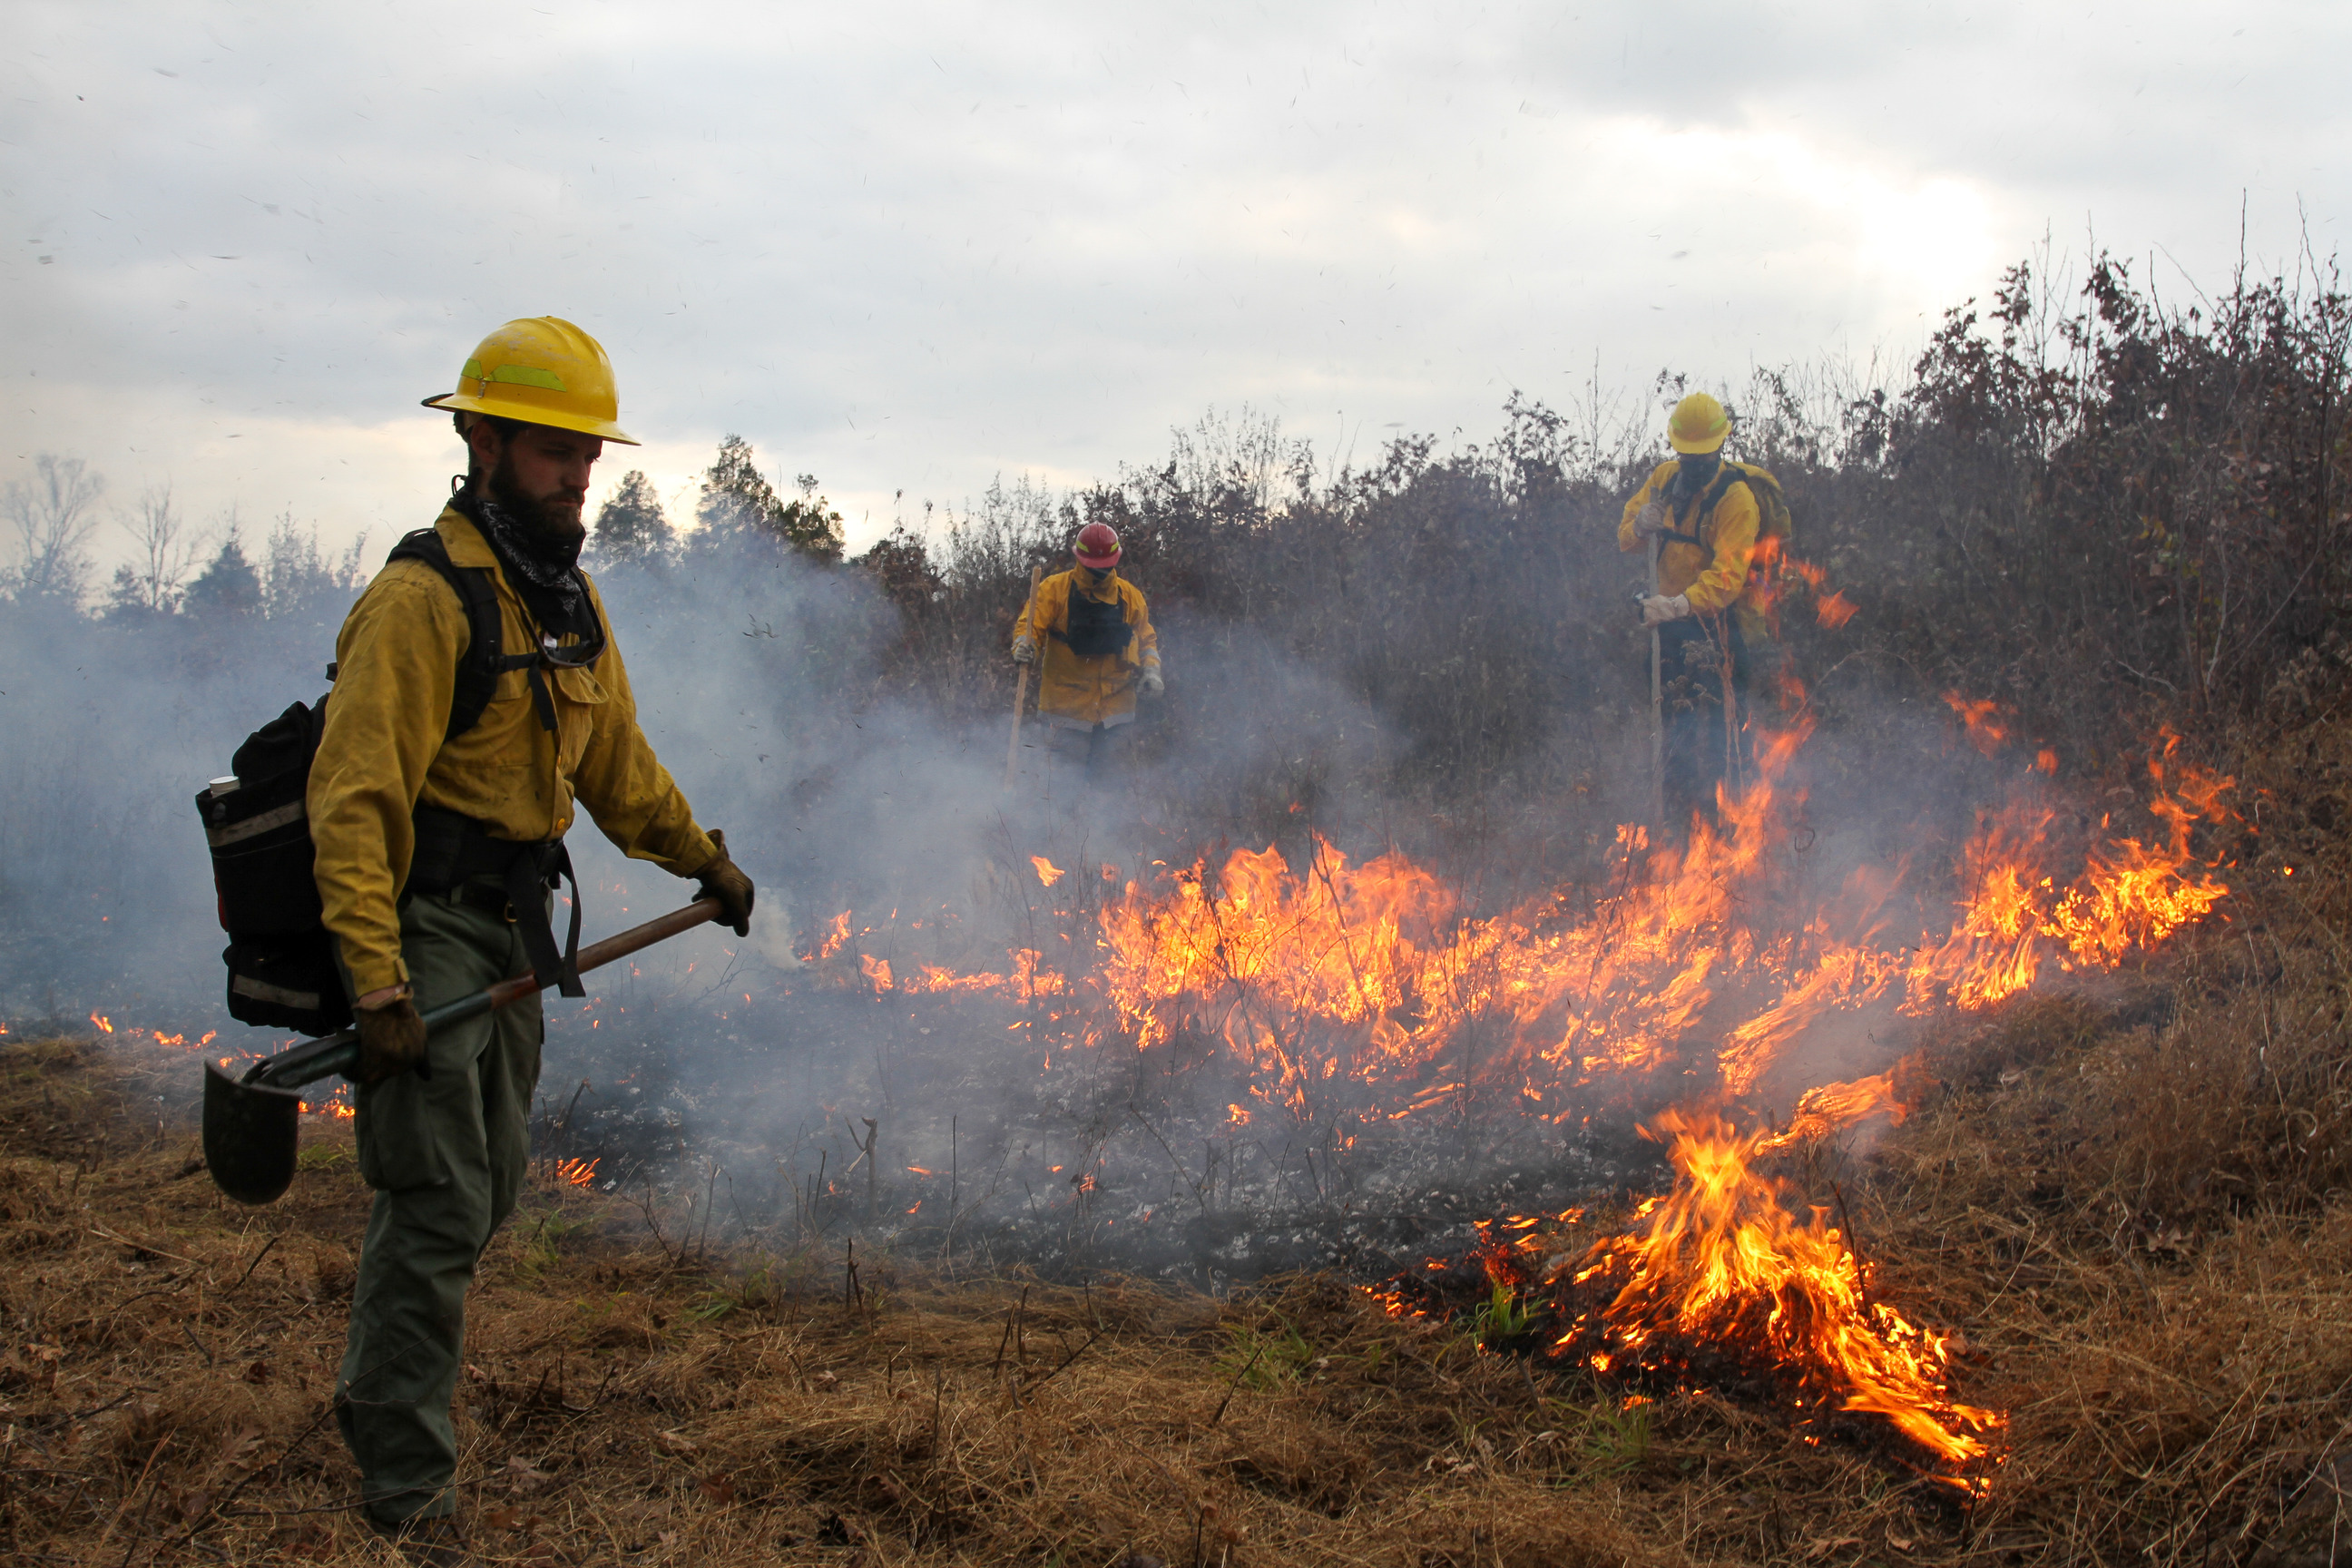 Wildland firefighters use drip torches and tools manage prescribed fire near Brawner Farm at Manassas National Battlefield Park. 